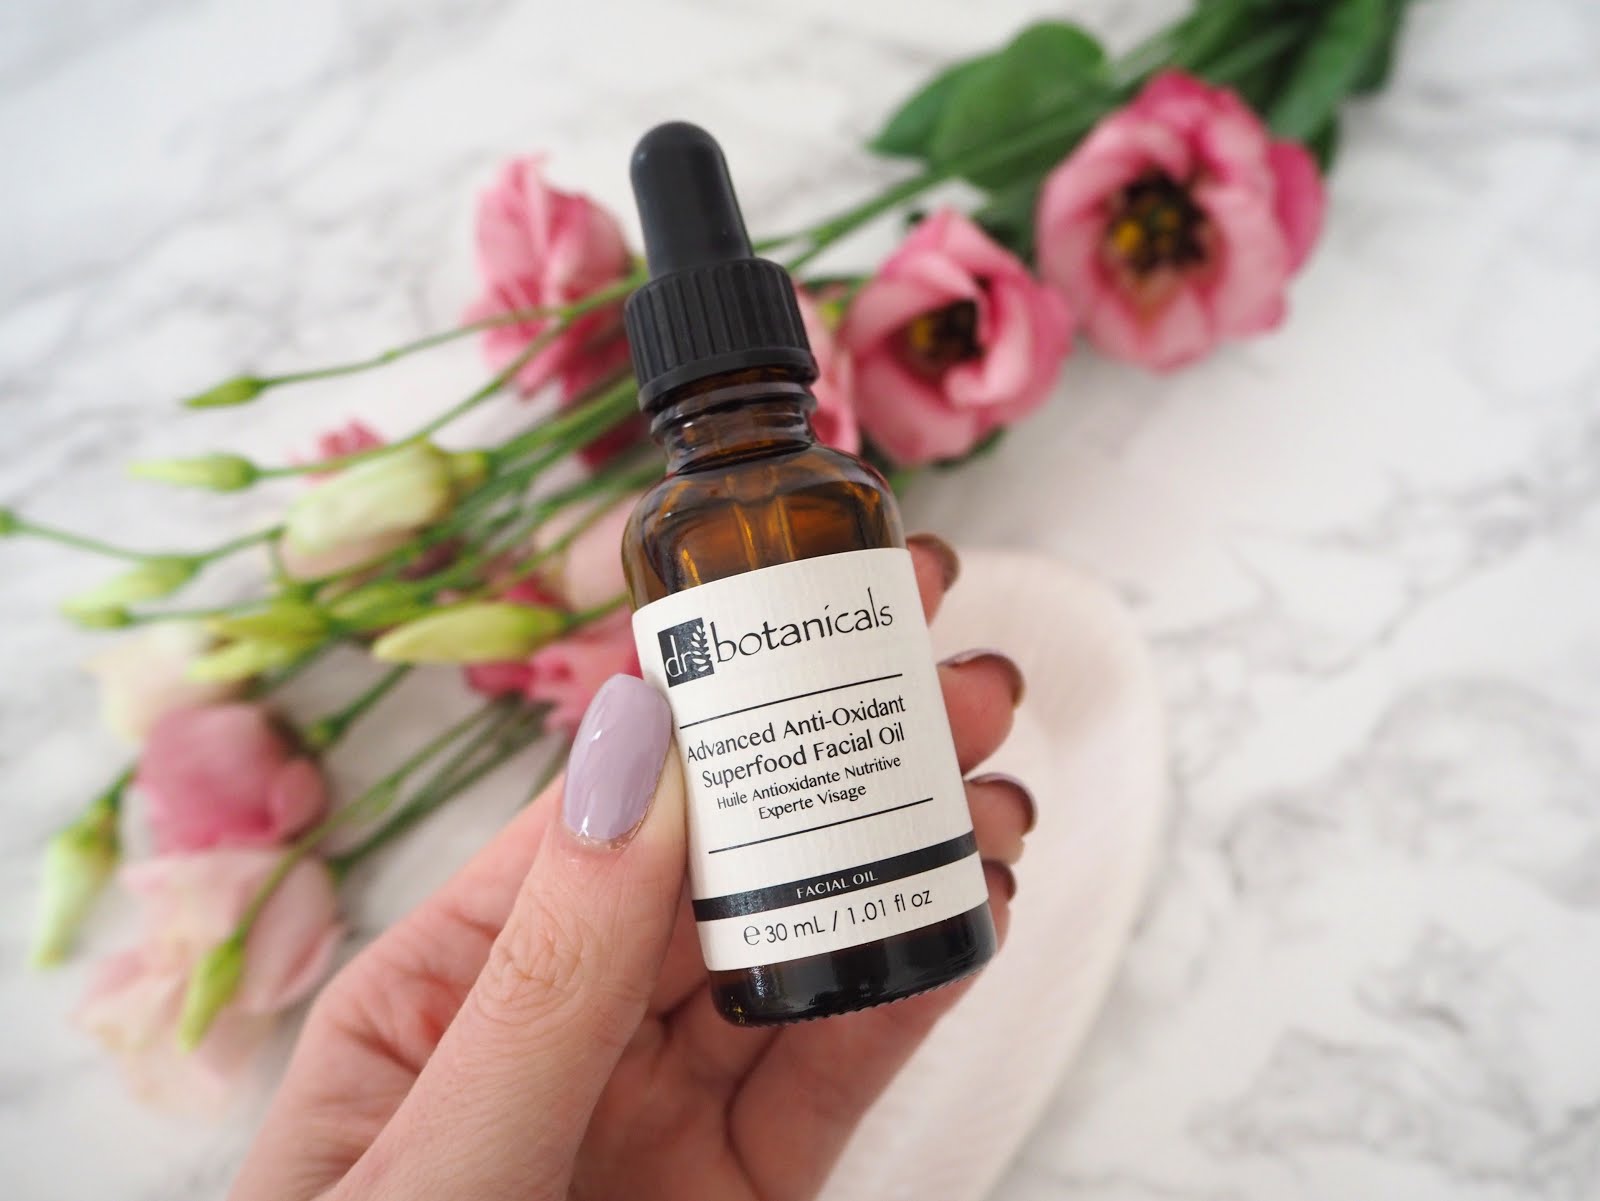 Dr Botanicals Advanced Anti-Oxidant Superfood Facial Oil, Katie Kirk Loves, Beauty Blogger, Dr Botanicals Skincare, UK Blogger, Skincare Review, Discount Code, Beauty Sleep, Facial Oil, Facial Treatment, Skincare Routine, Luxury Skincare Products